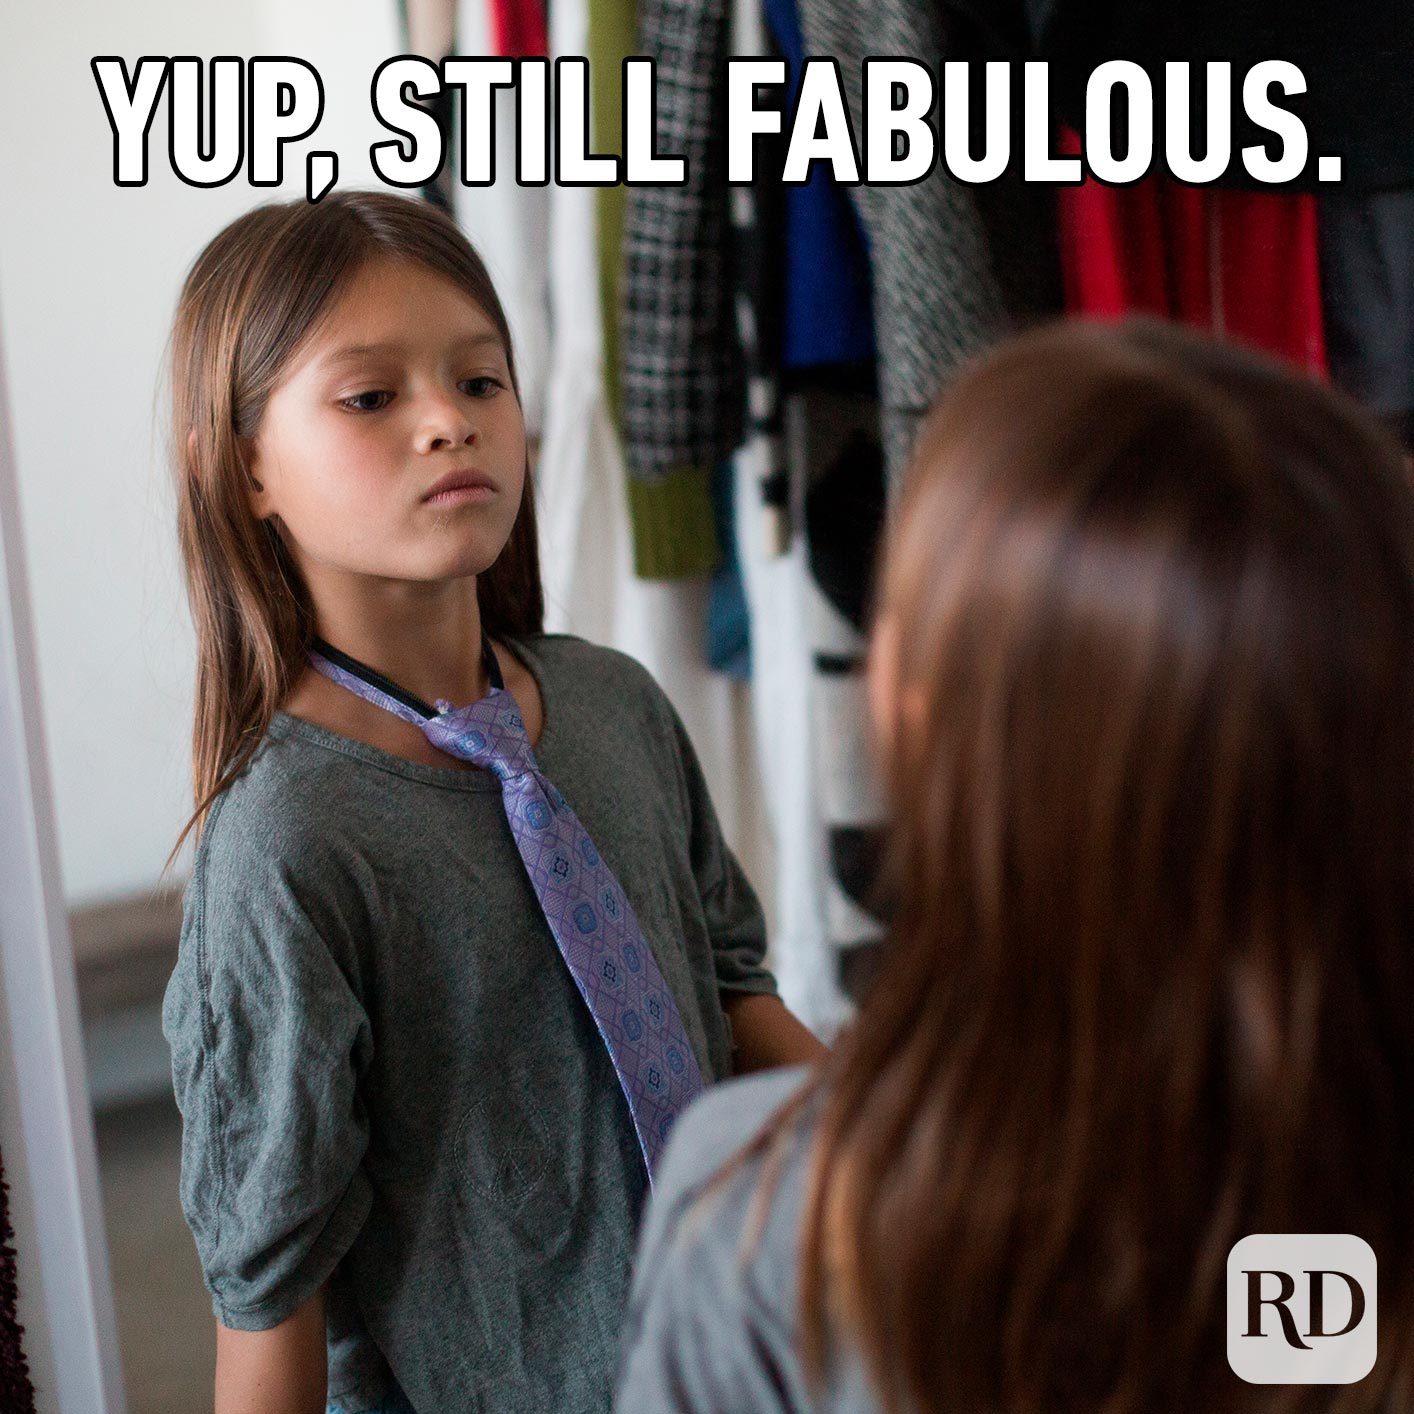 Young girl looking at herself in the mirror, wearing a men's necktie. Meme text: Yup, still fabulous.